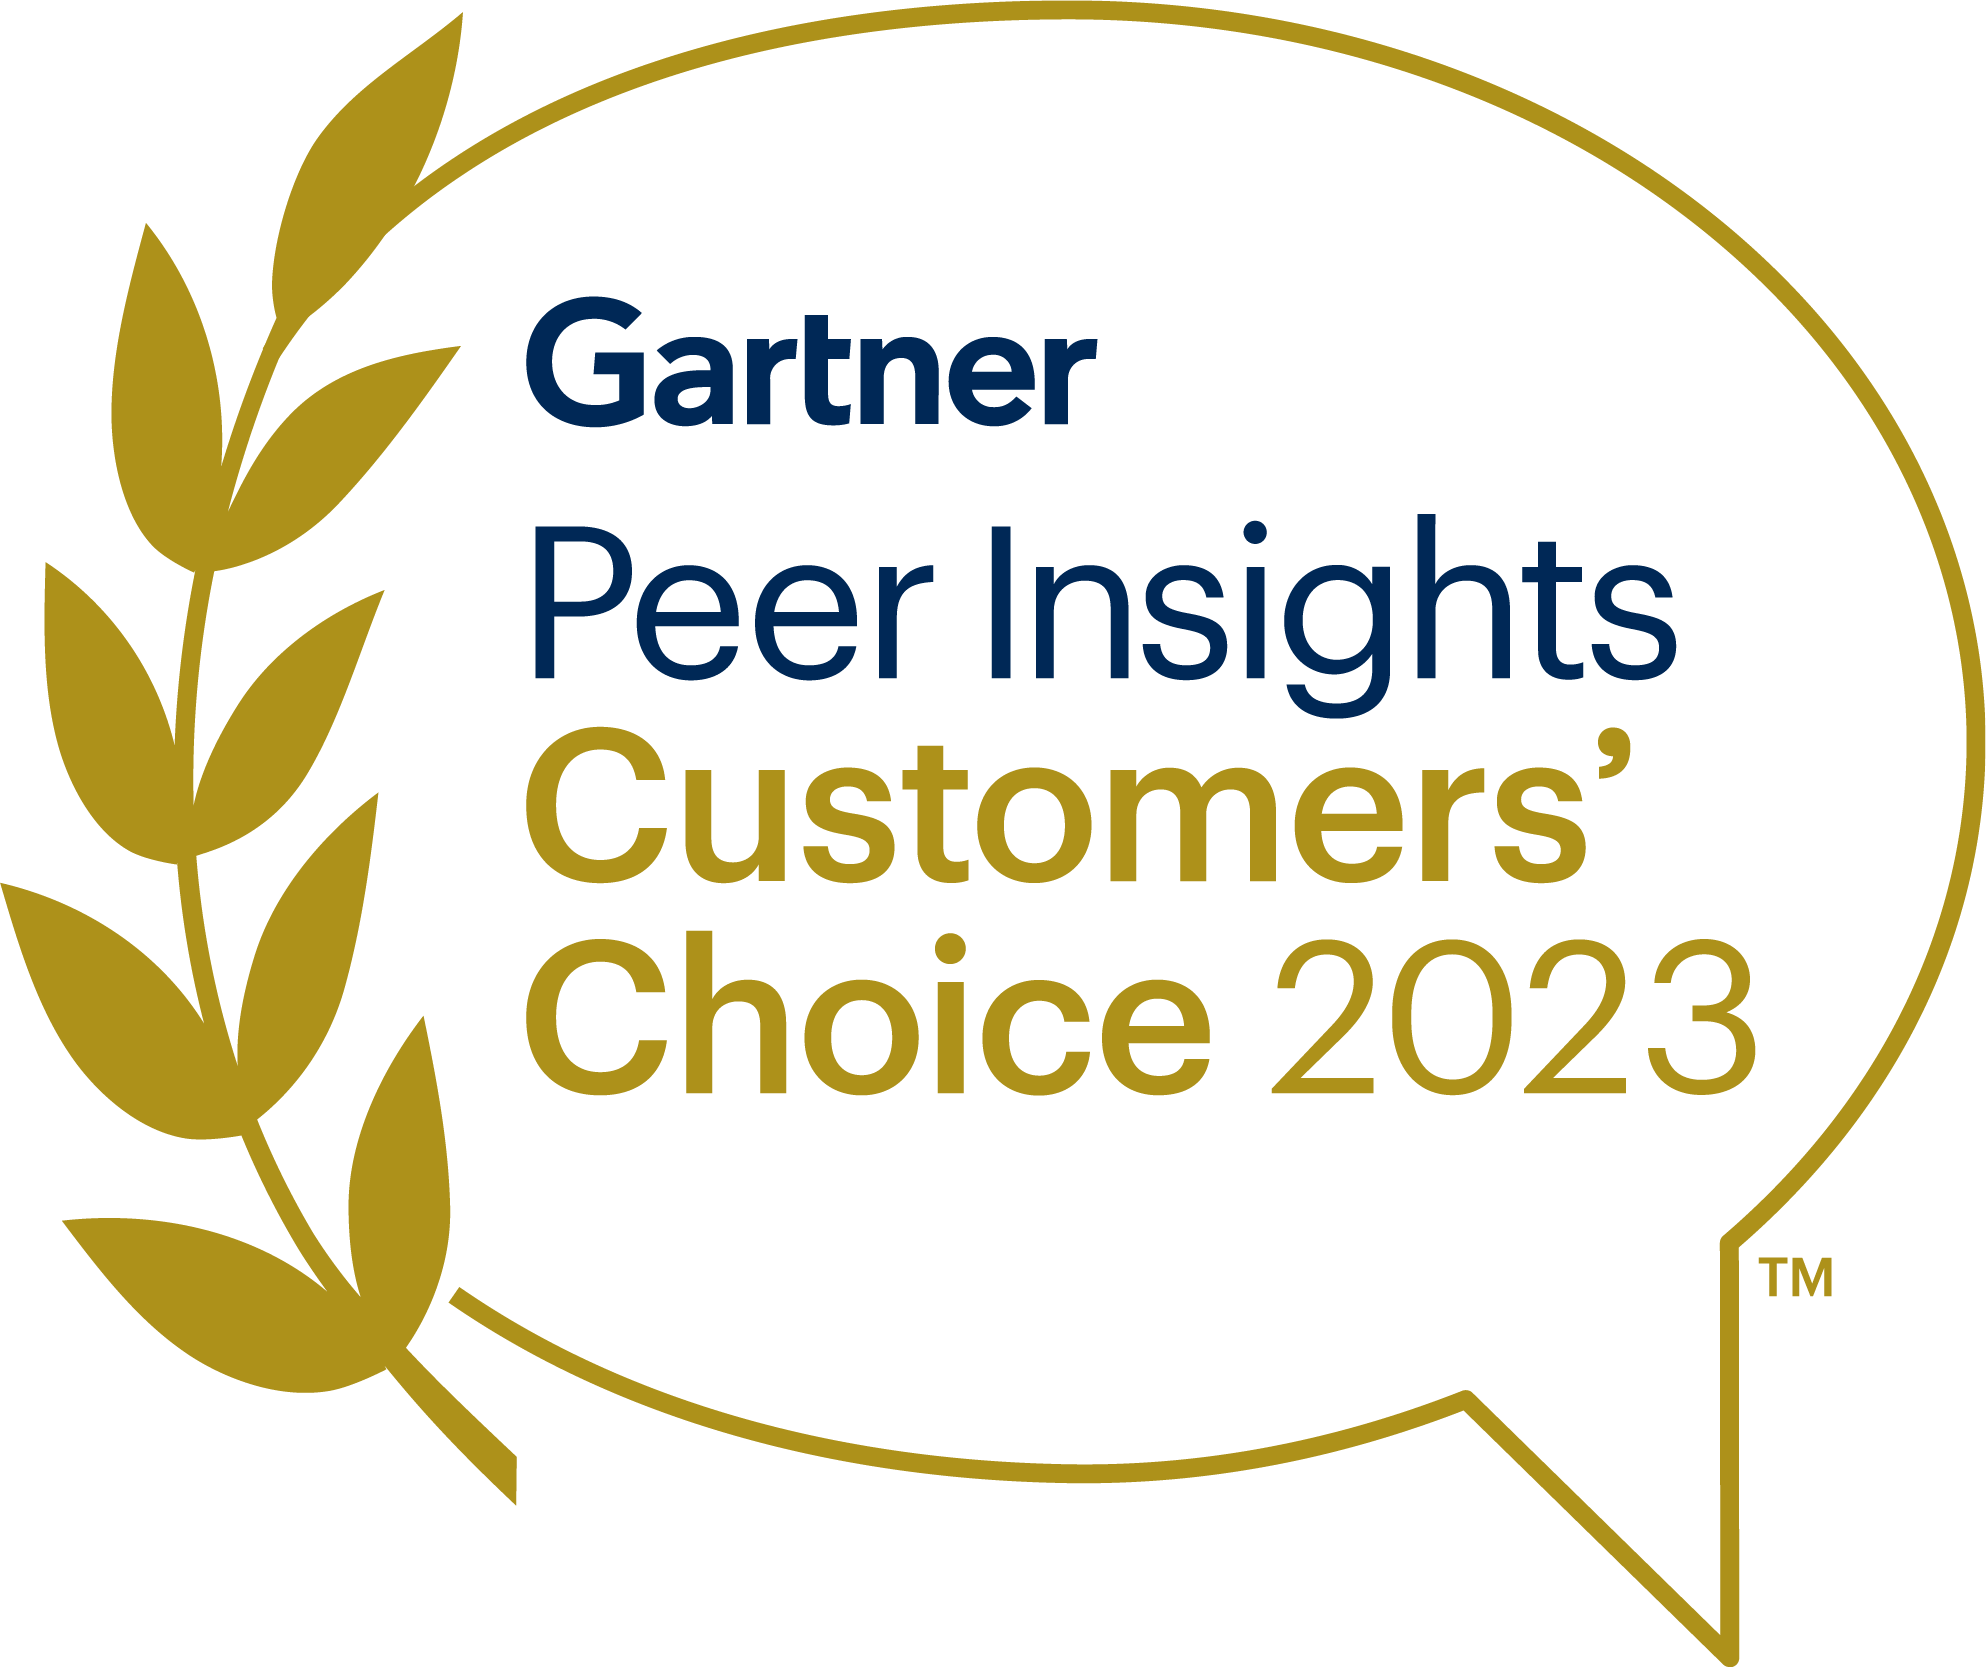 Gartner peer insights customers's choice recognition 2023